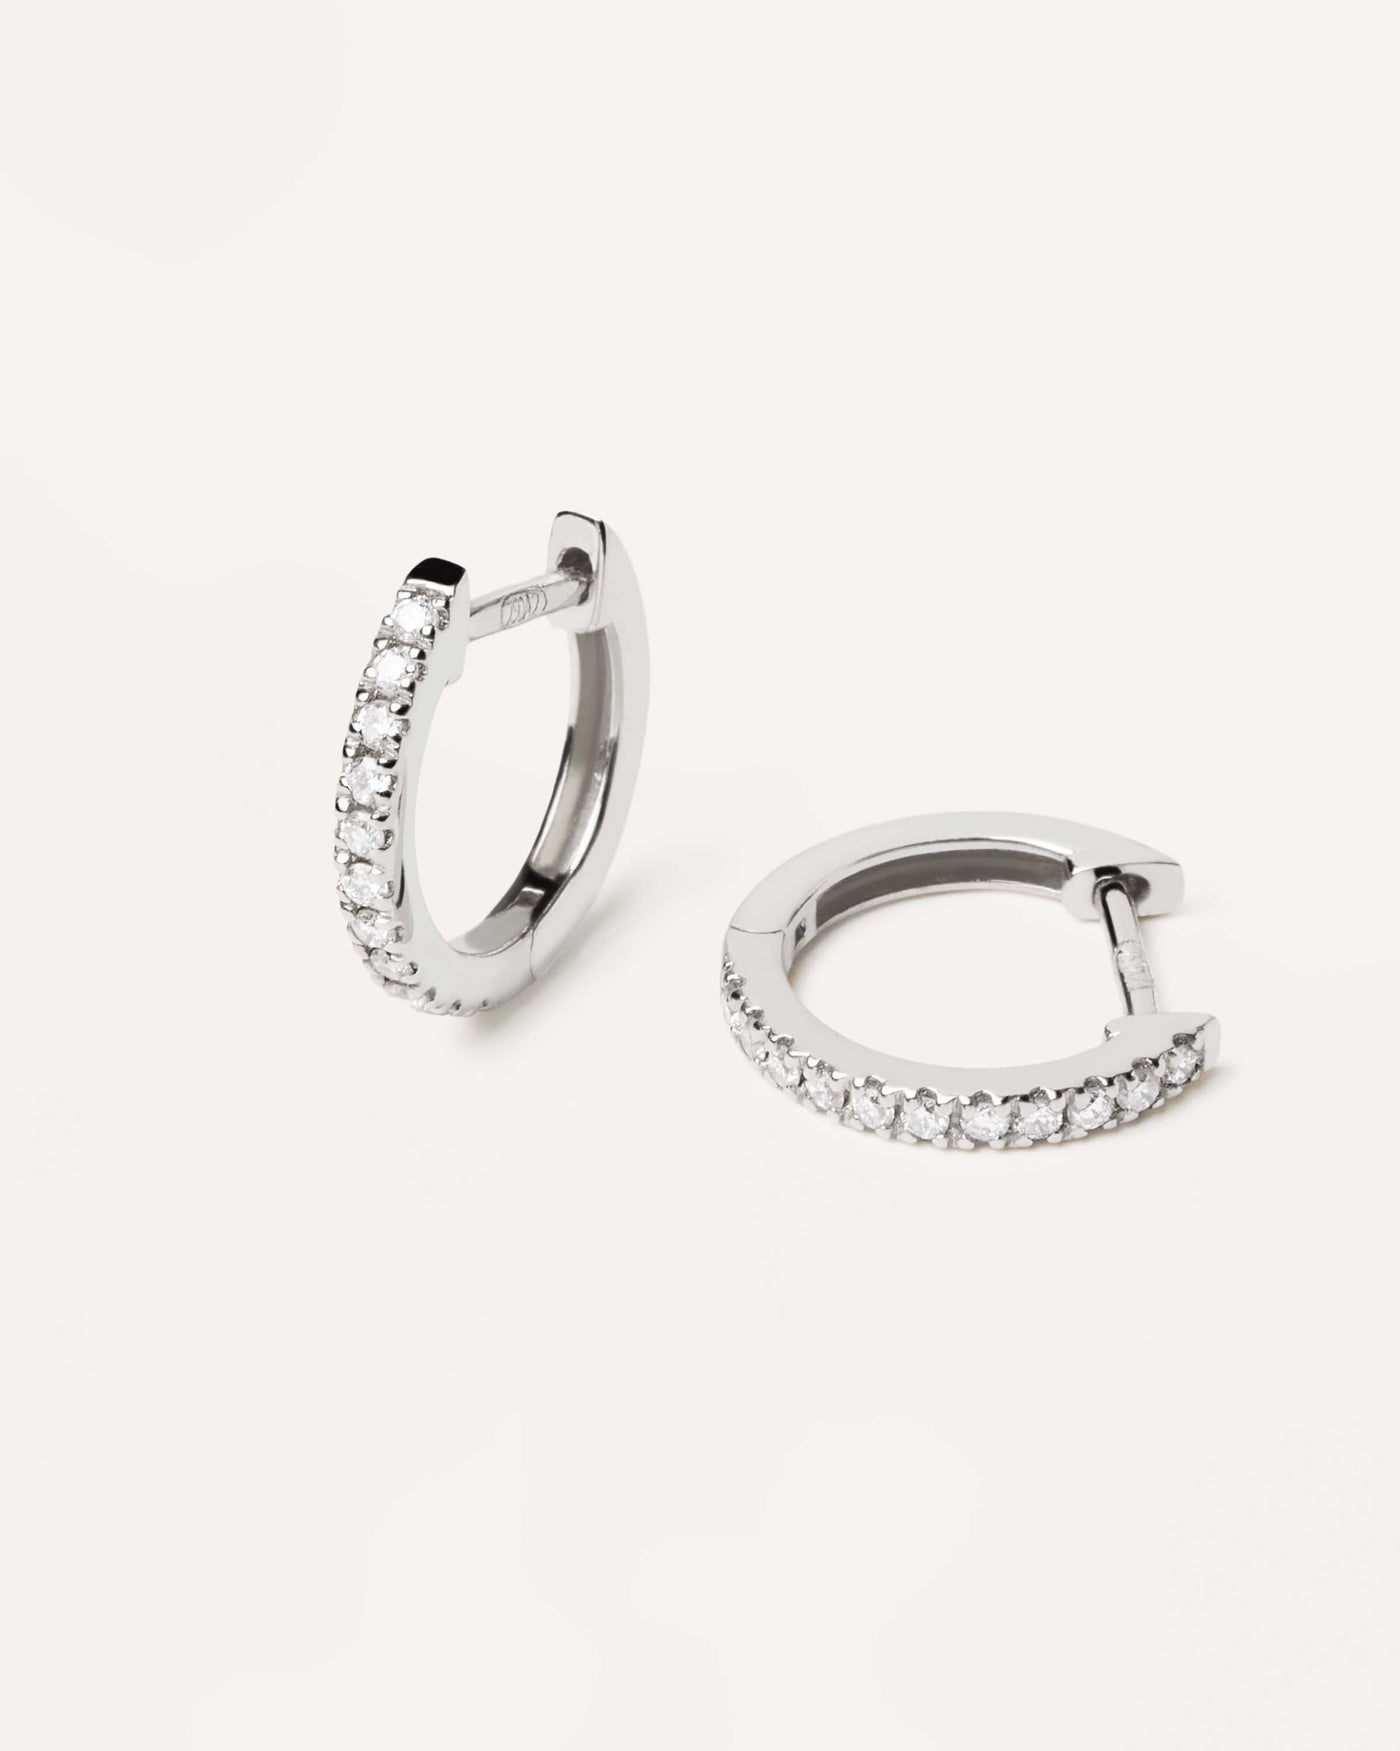 2024 Selection | Diamonds and White Gold Eternity Mini Hoops. Small 18K white gold hoop earrings, set with lab-grown diamonds of 0.18 carats in total. Get the latest arrival from PDPAOLA. Place your order safely and get this Best Seller. Free Shipping.